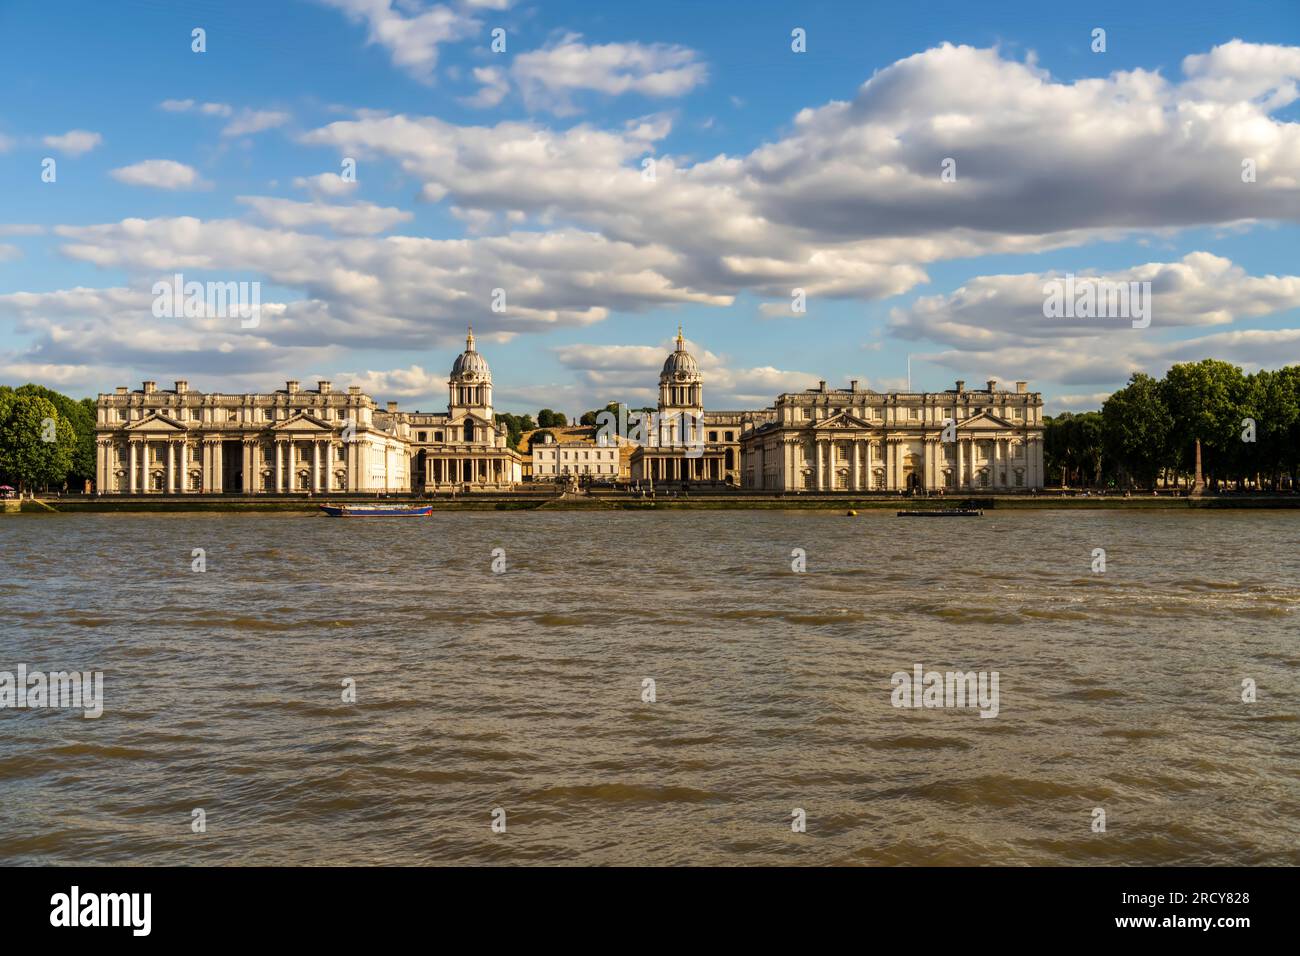 Greenwich cityscape. A historic and popular London borough, located on the Thames river and home to several national landmarks and museums. Top site. Stock Photo